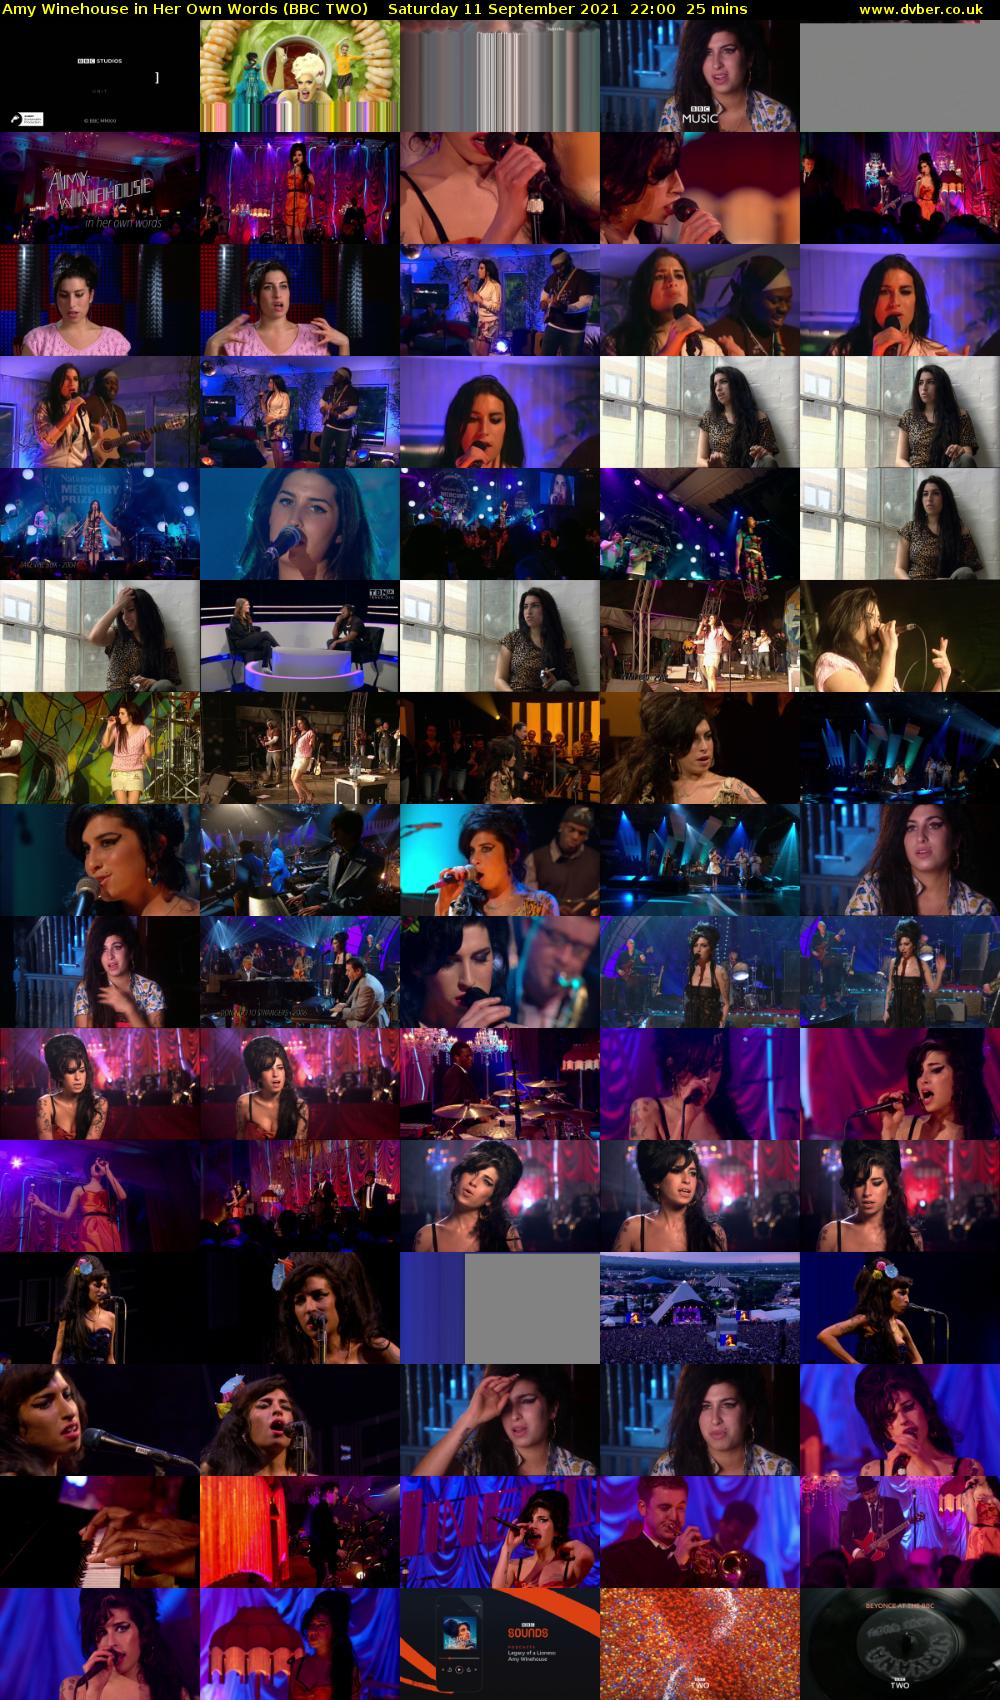 Amy Winehouse in Her Own Words (BBC TWO) Saturday 11 September 2021 22:00 - 22:25